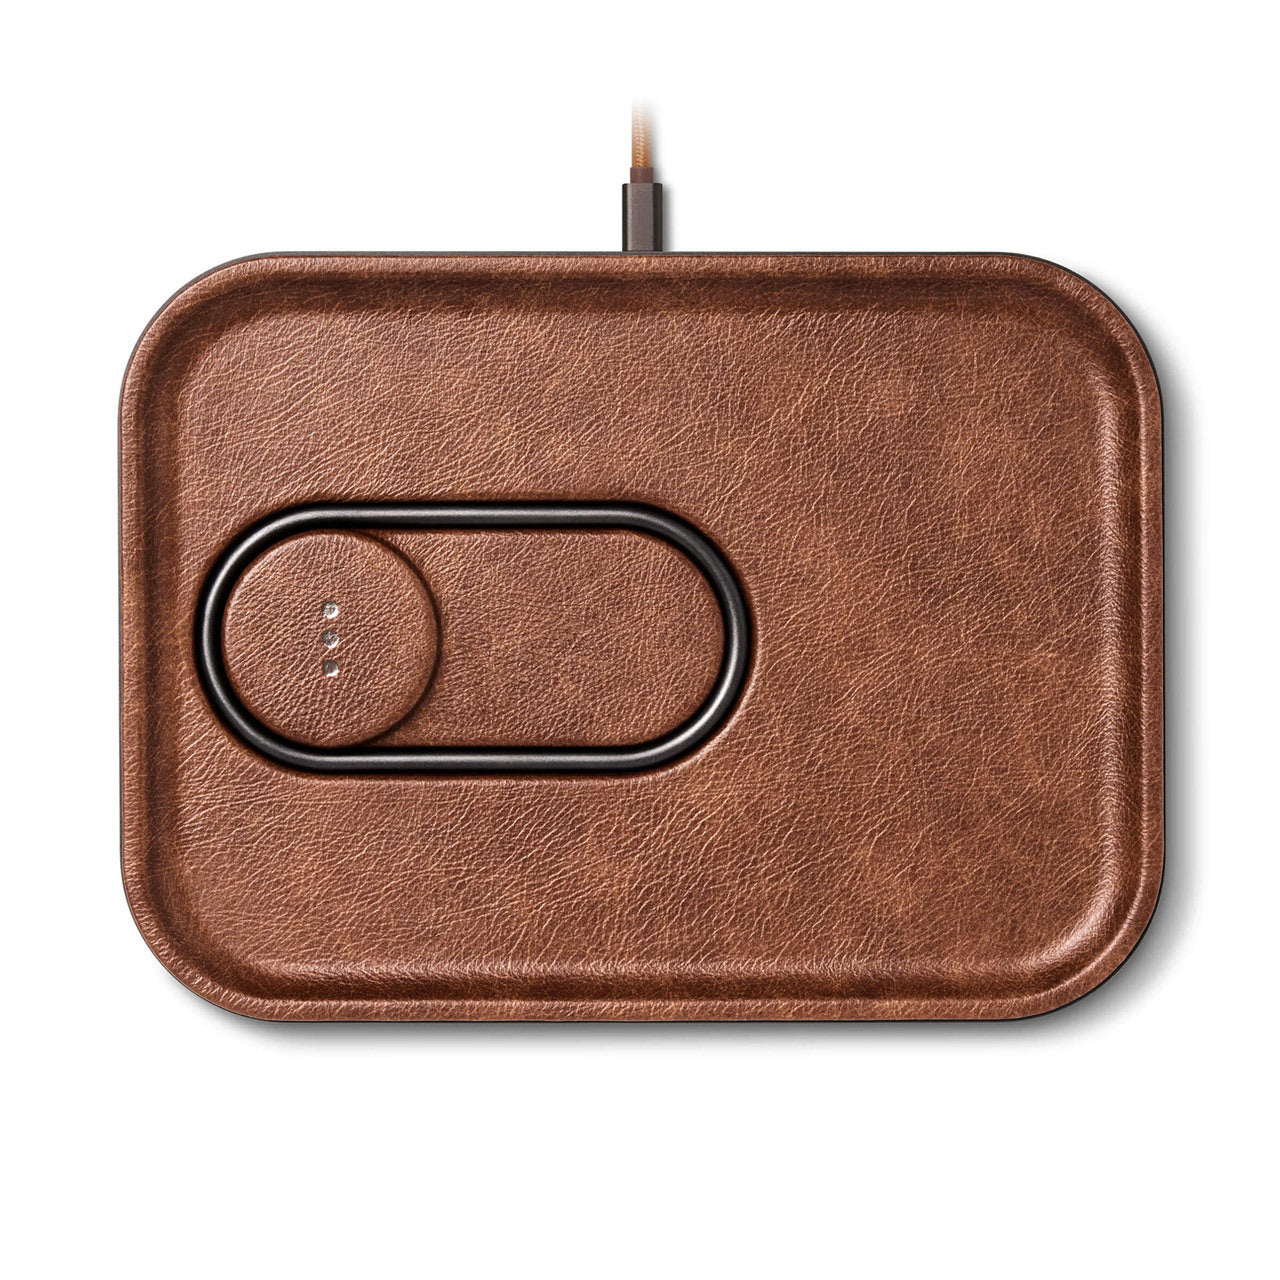 Courant Mag 3 Wireless Charging Valet